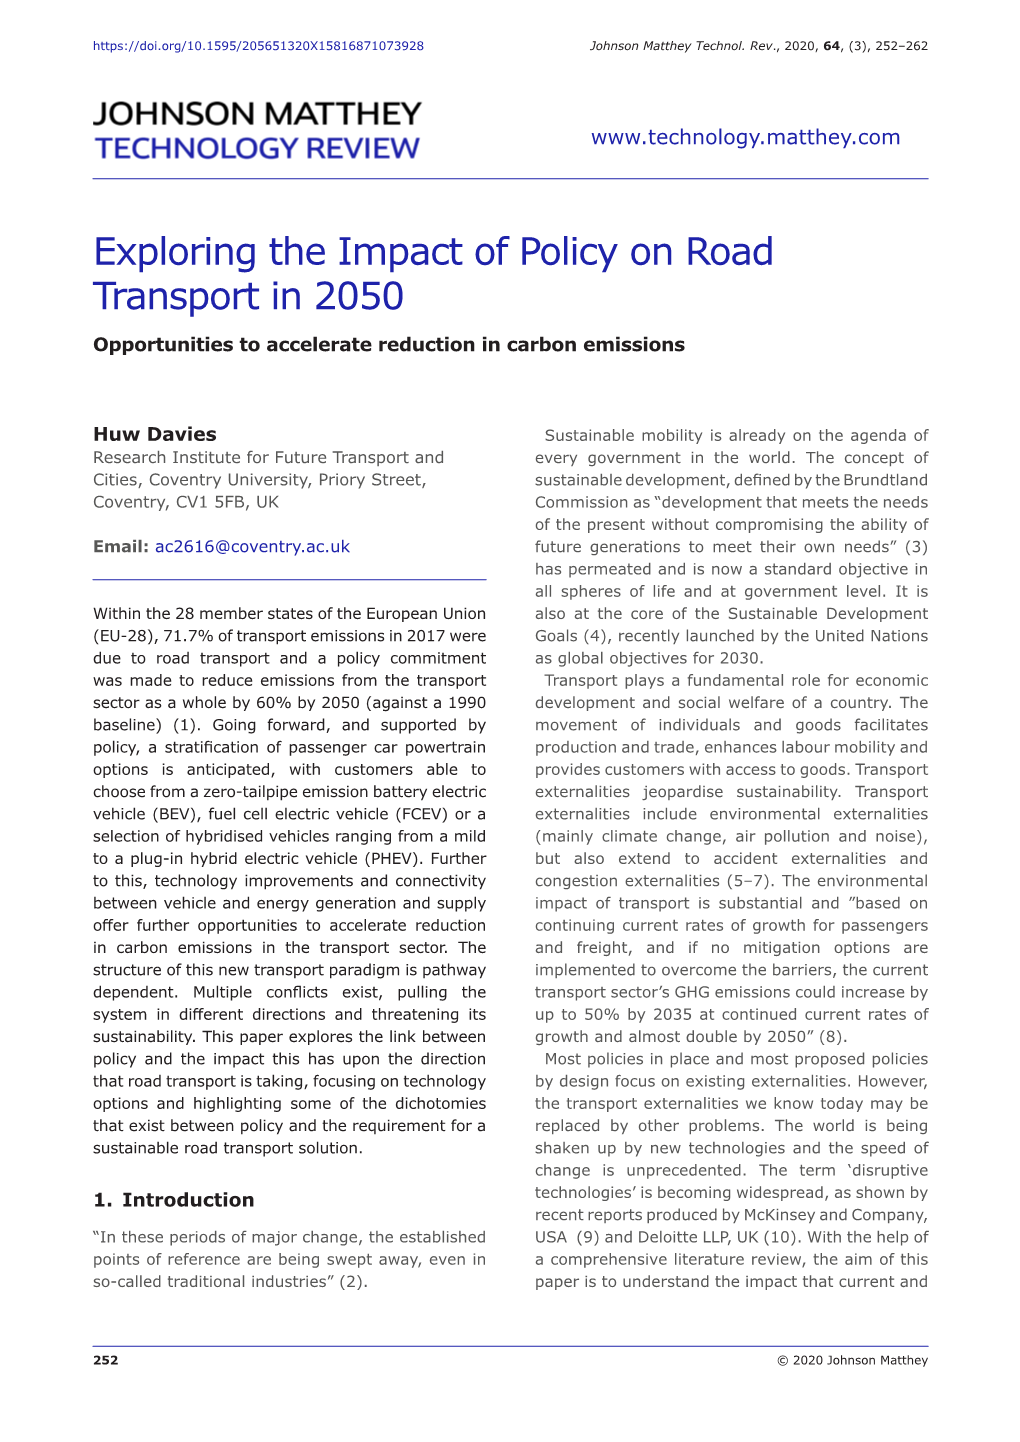 Exploring the Impact of Policy on Road Transport in 2050 Opportunities to Accelerate Reduction in Carbon Emissions